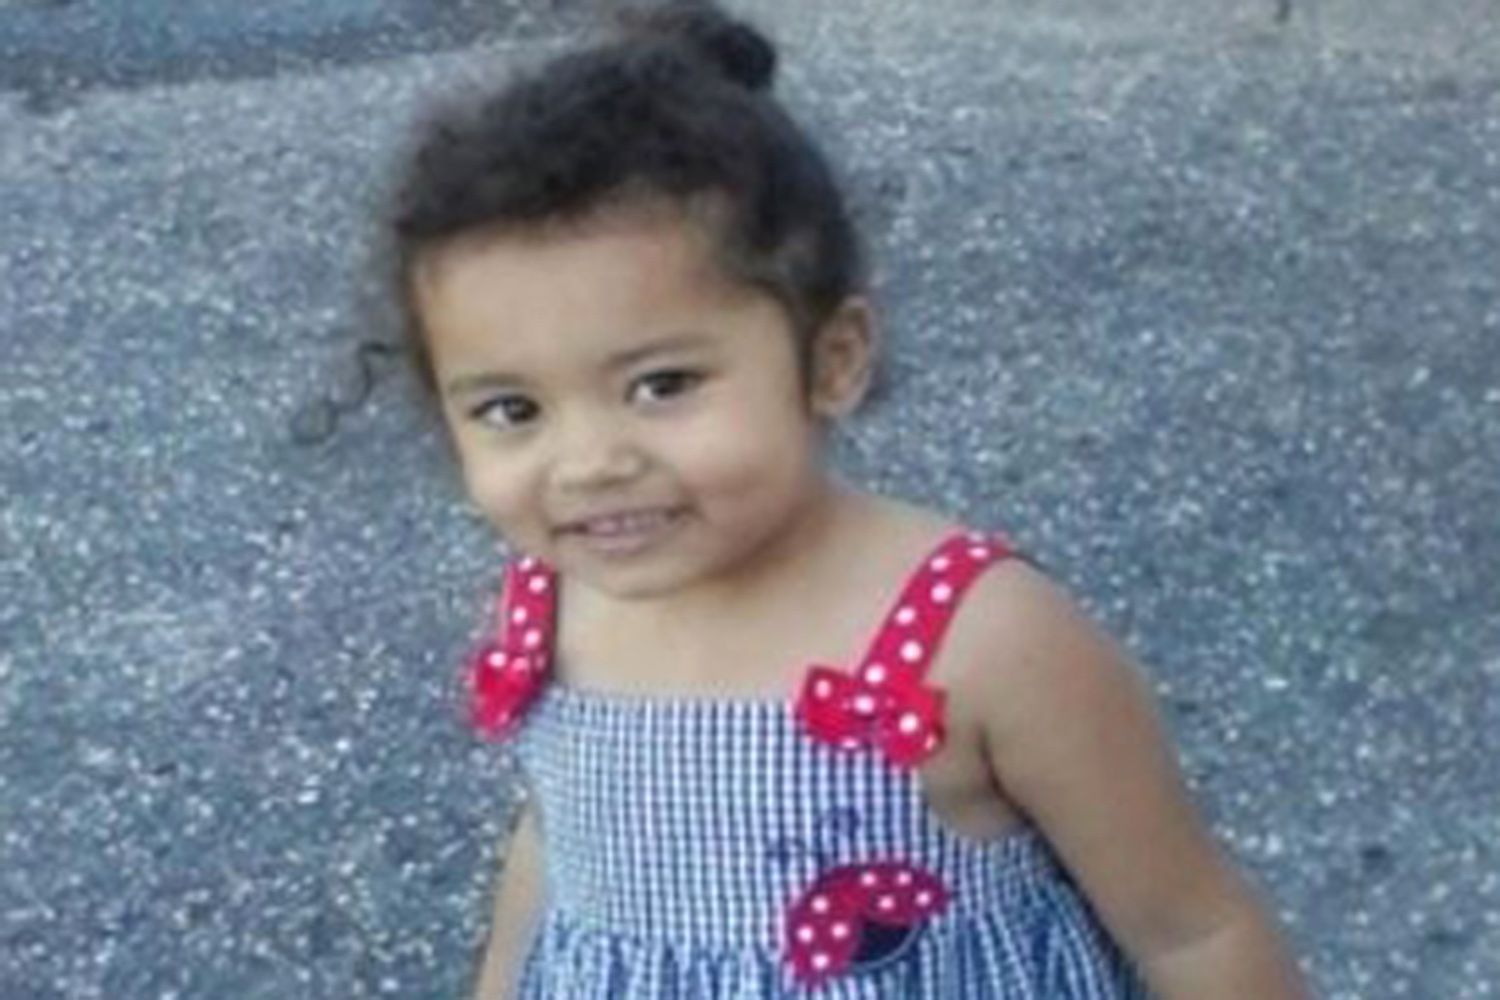 5-Year-Old Paitin Fields' Life Was 'Cut Short Because of a Monster,' Says N.C. Community Leader